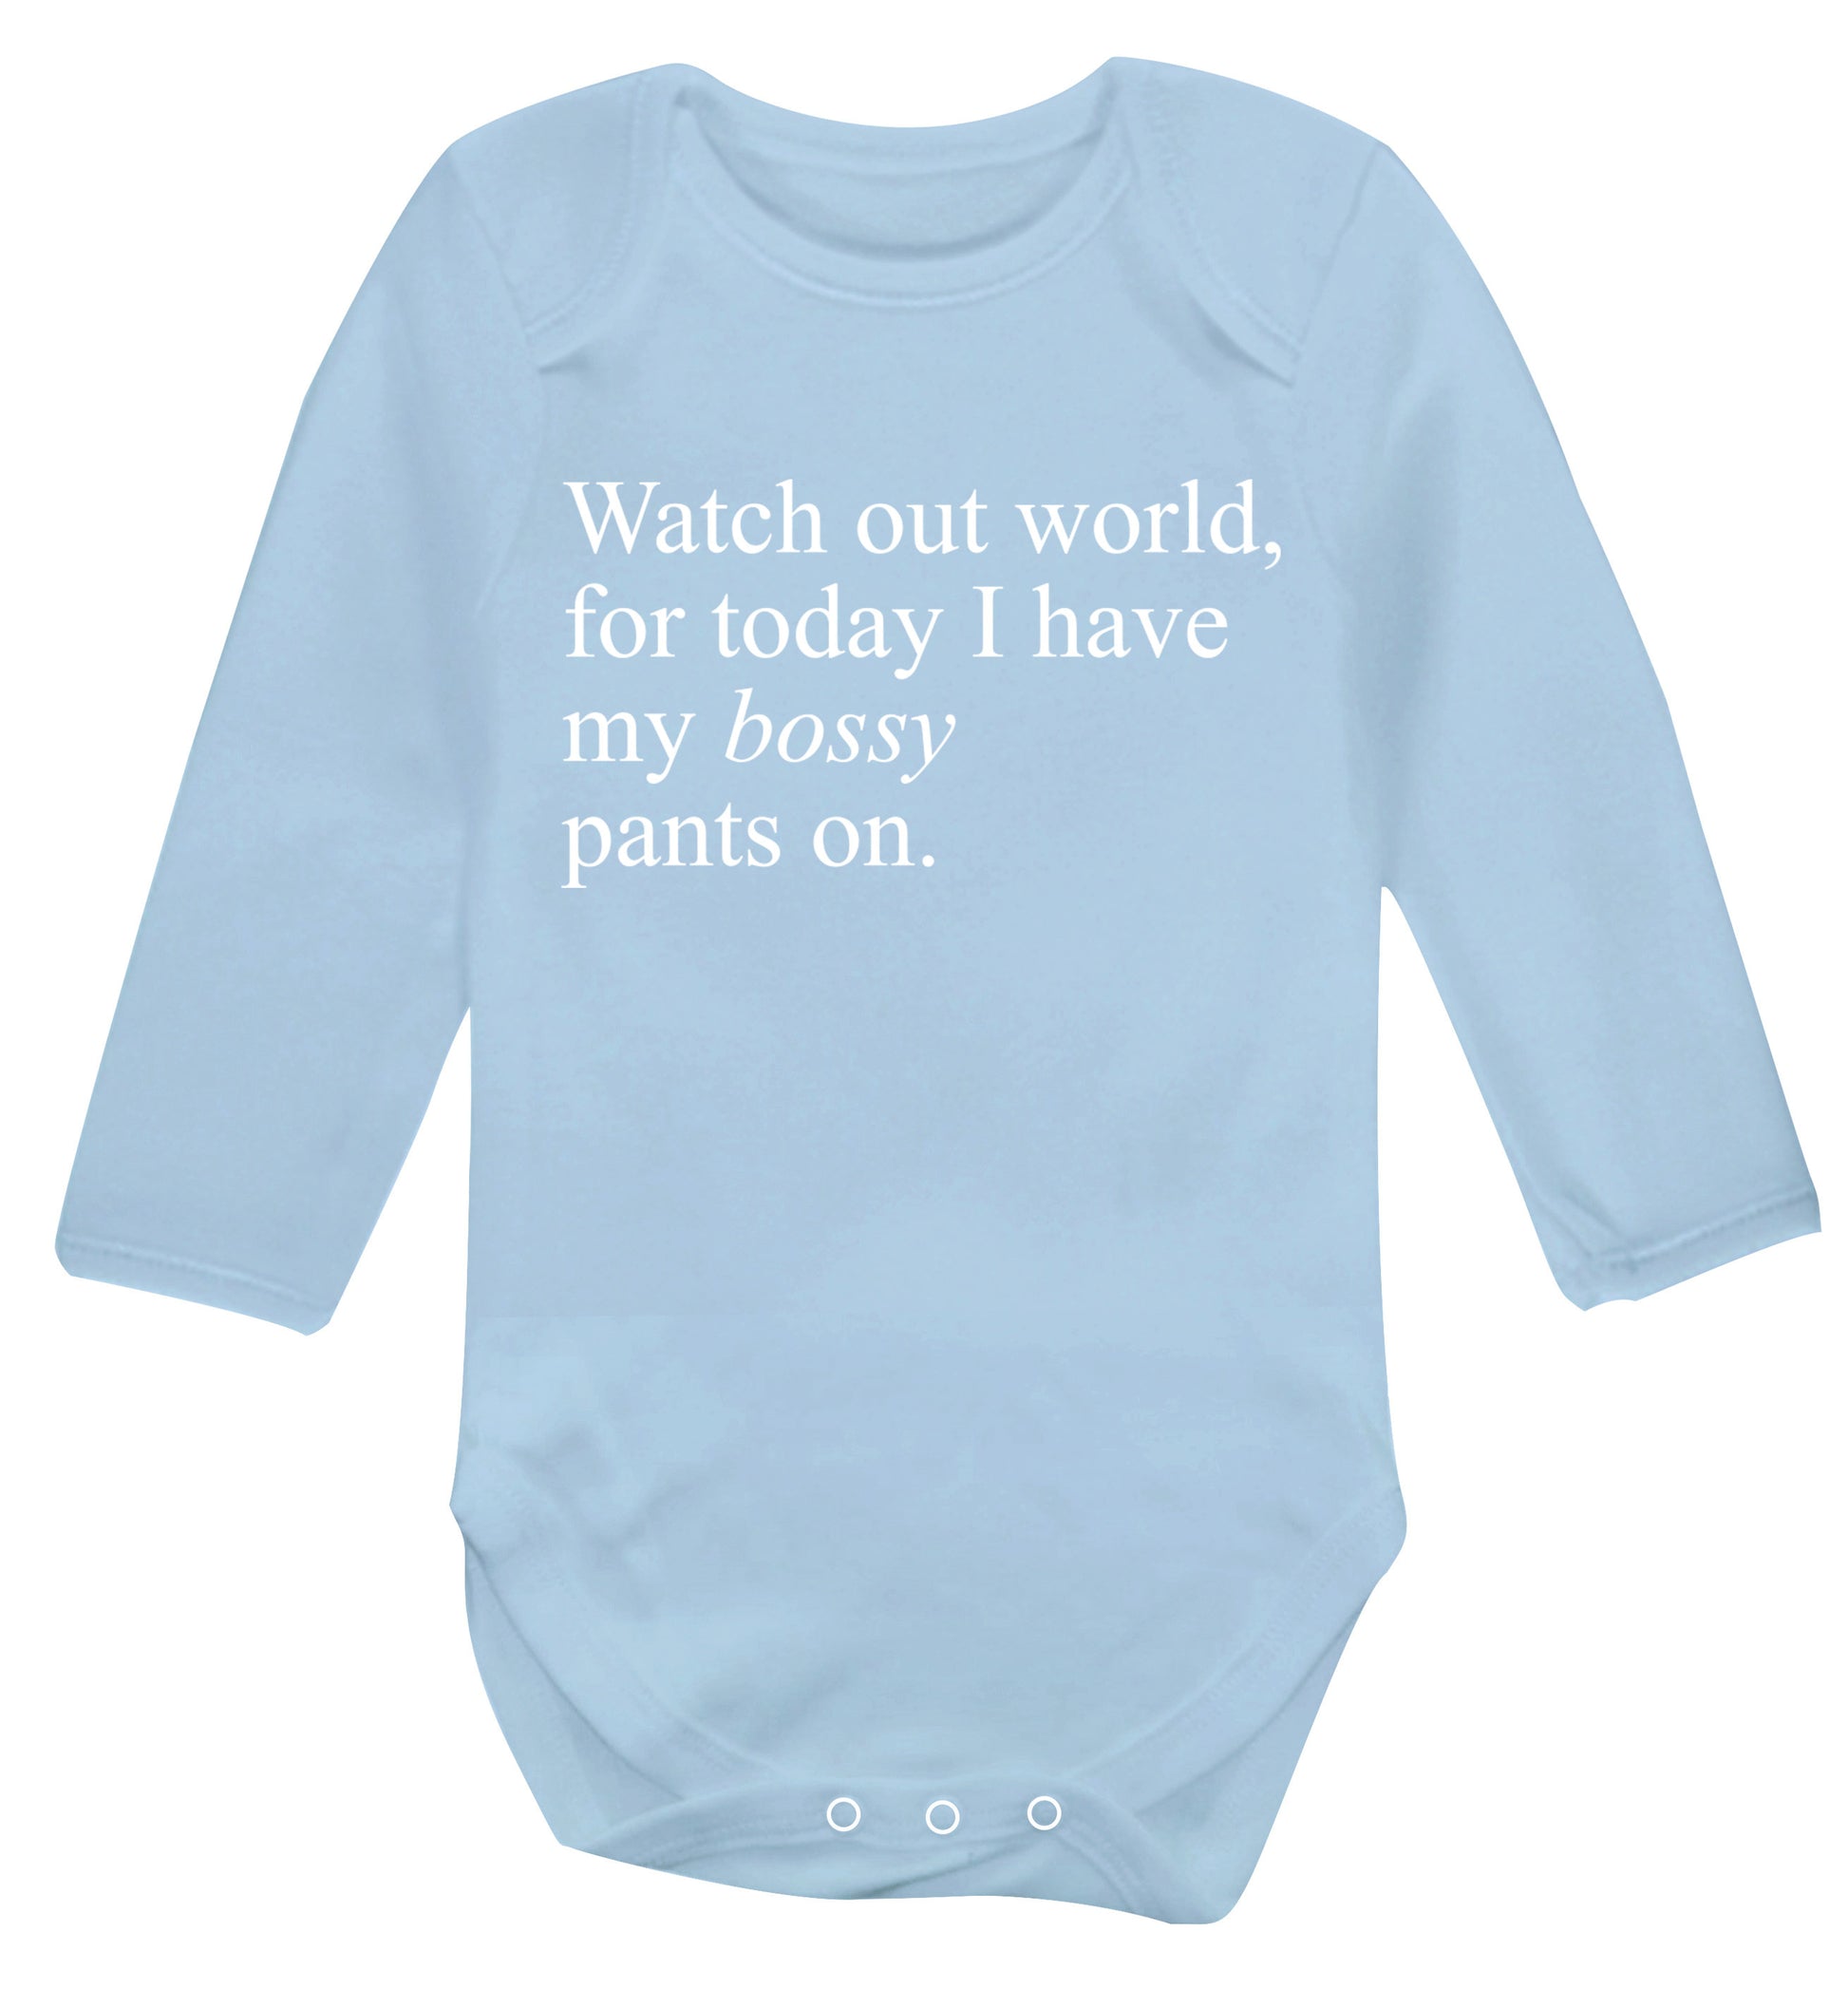 Watch out world, for today I have my bossy pants on Baby Vest long sleeved pale blue 6-12 months